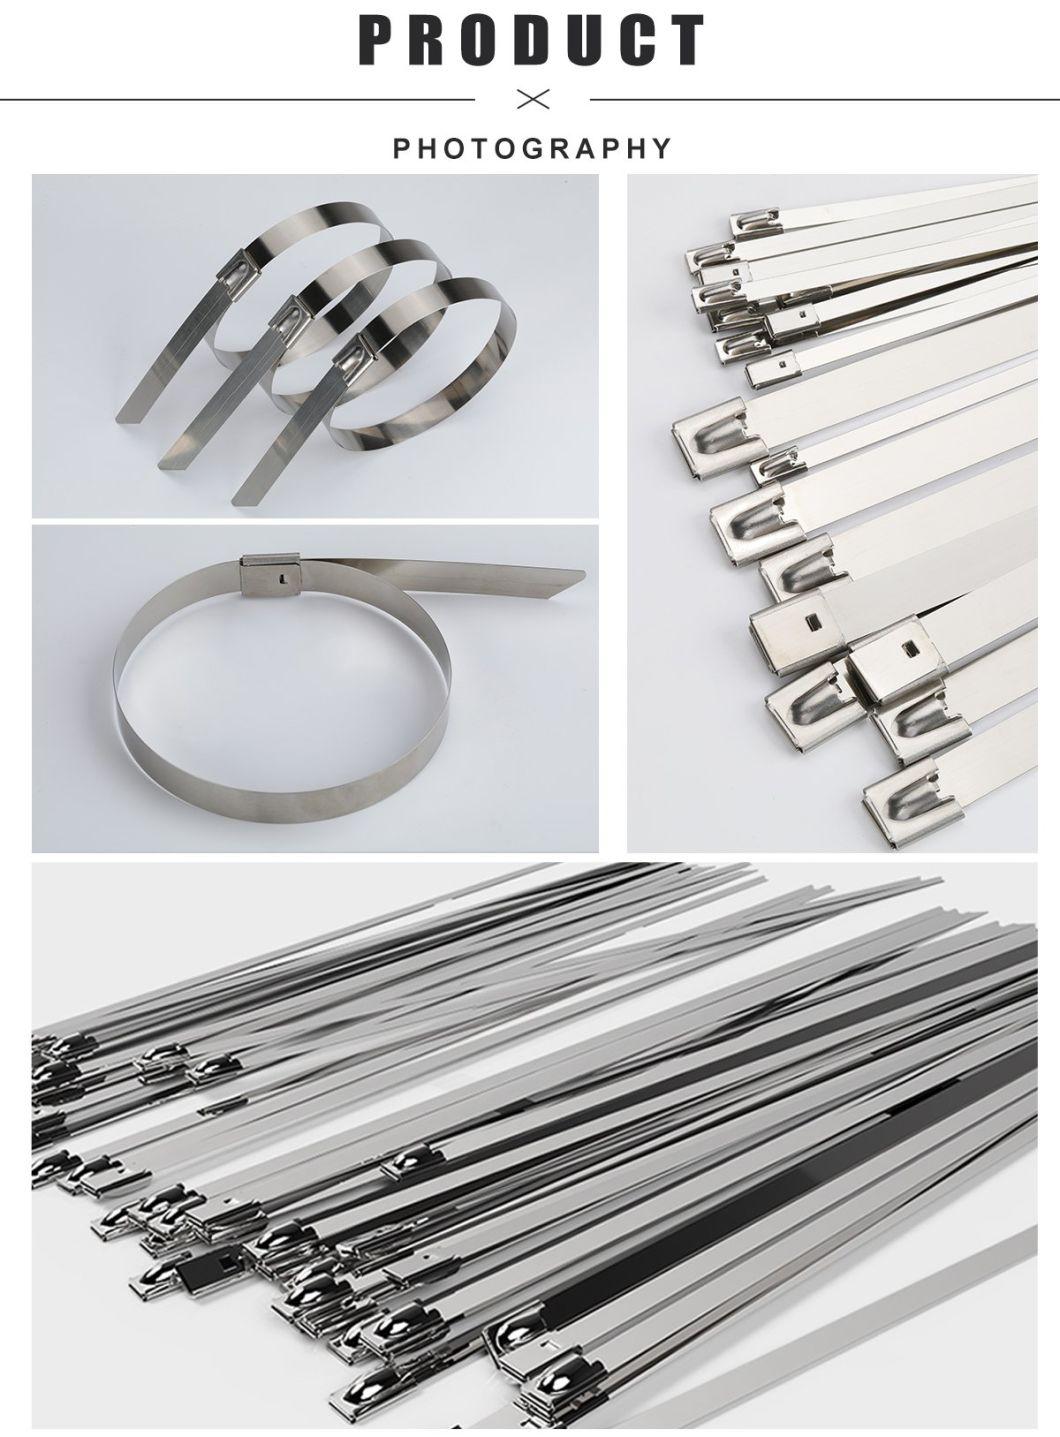 7.9X400mm 304 Stainless Steel Cable Ties